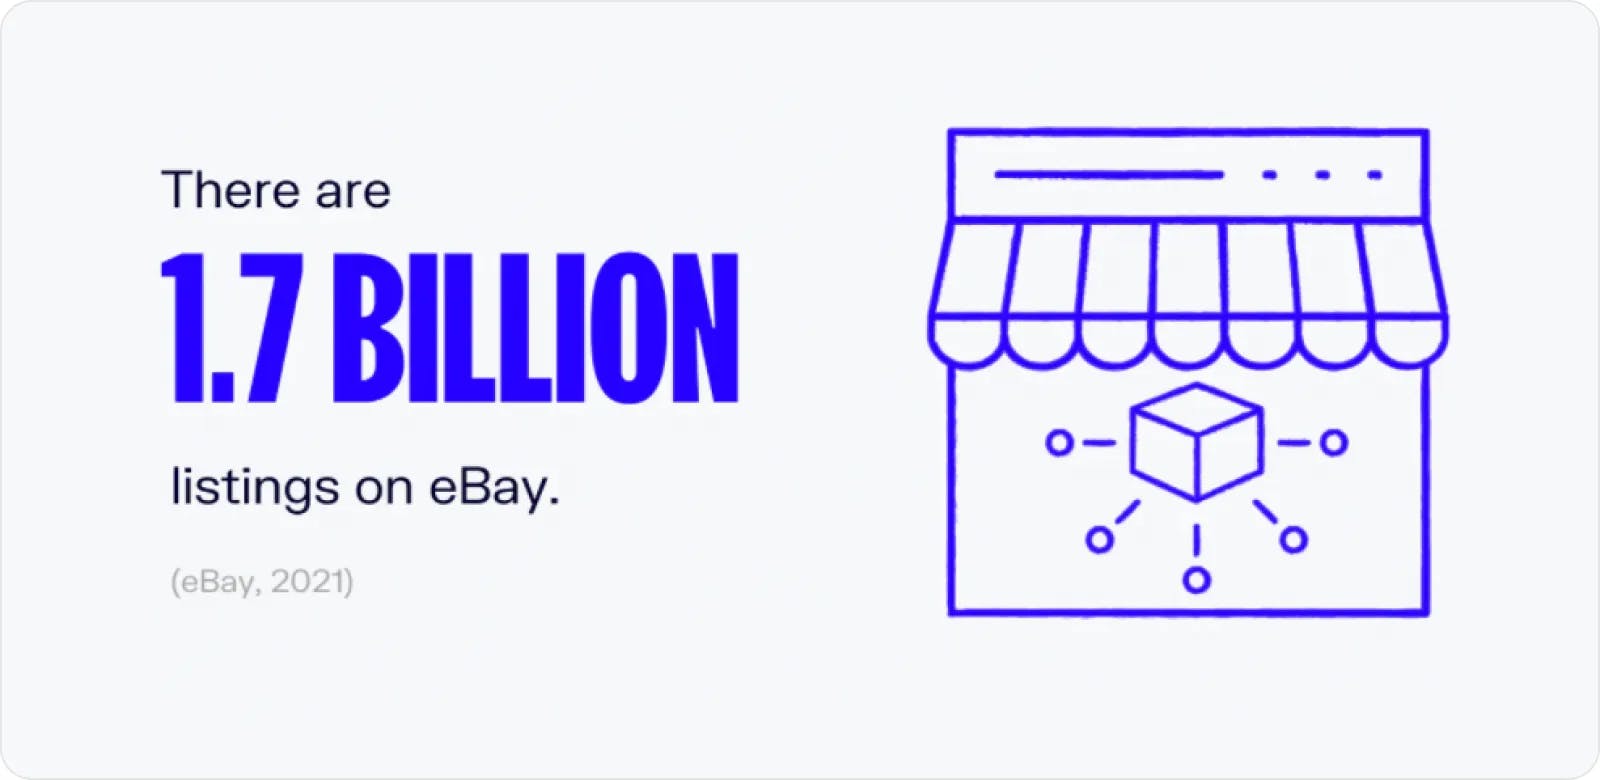 There are 1.7 billion listings on Etsy